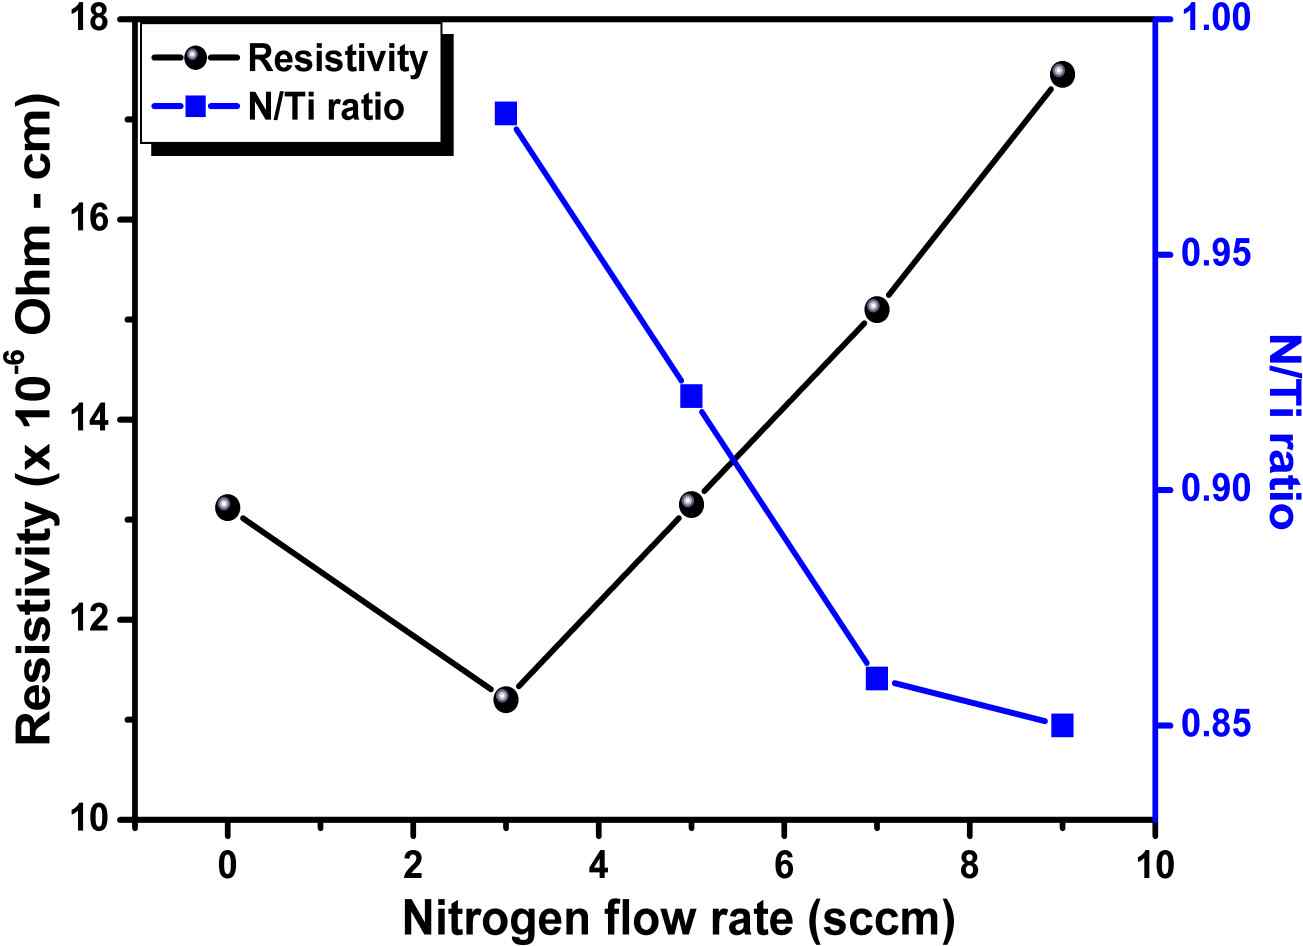 Fig. 3 The resistivity and N/Ti ratio (stoichiometry) of the TiN films as a function of the nitrogen flow.